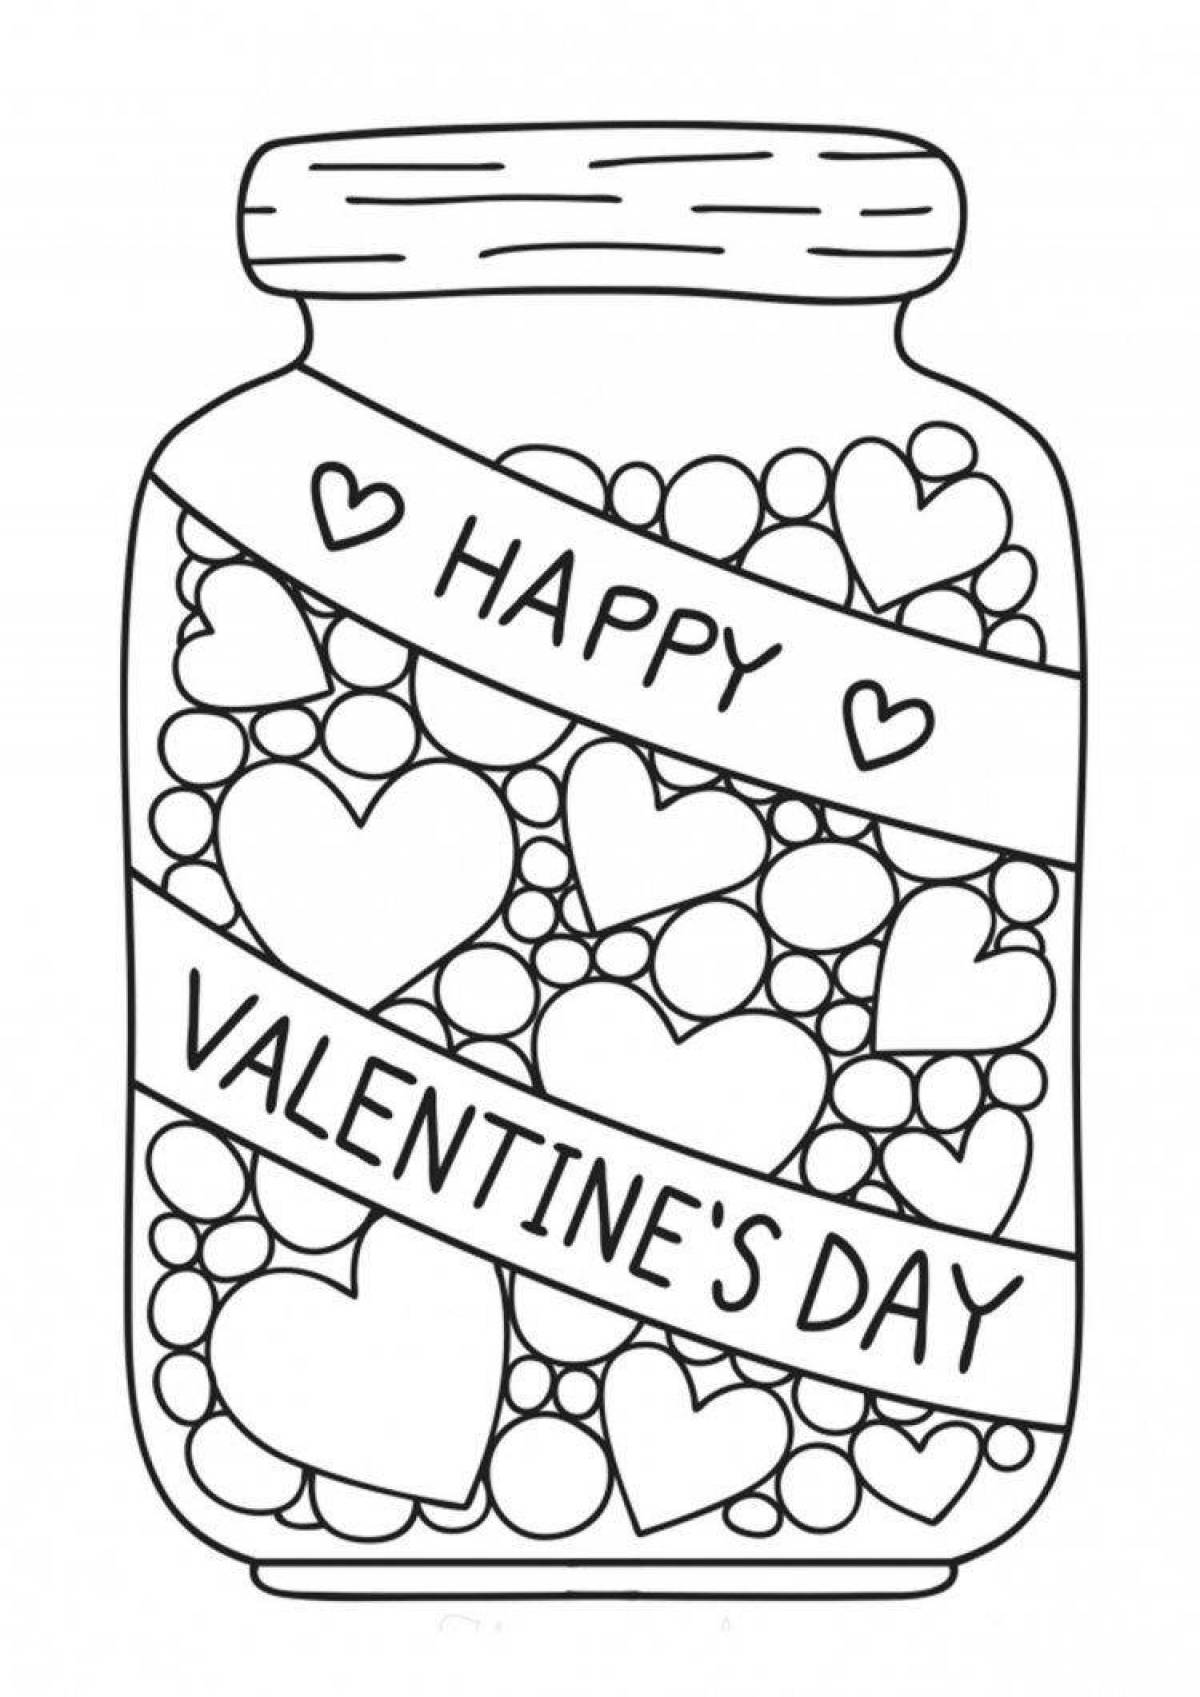 Playful marmalade coloring page